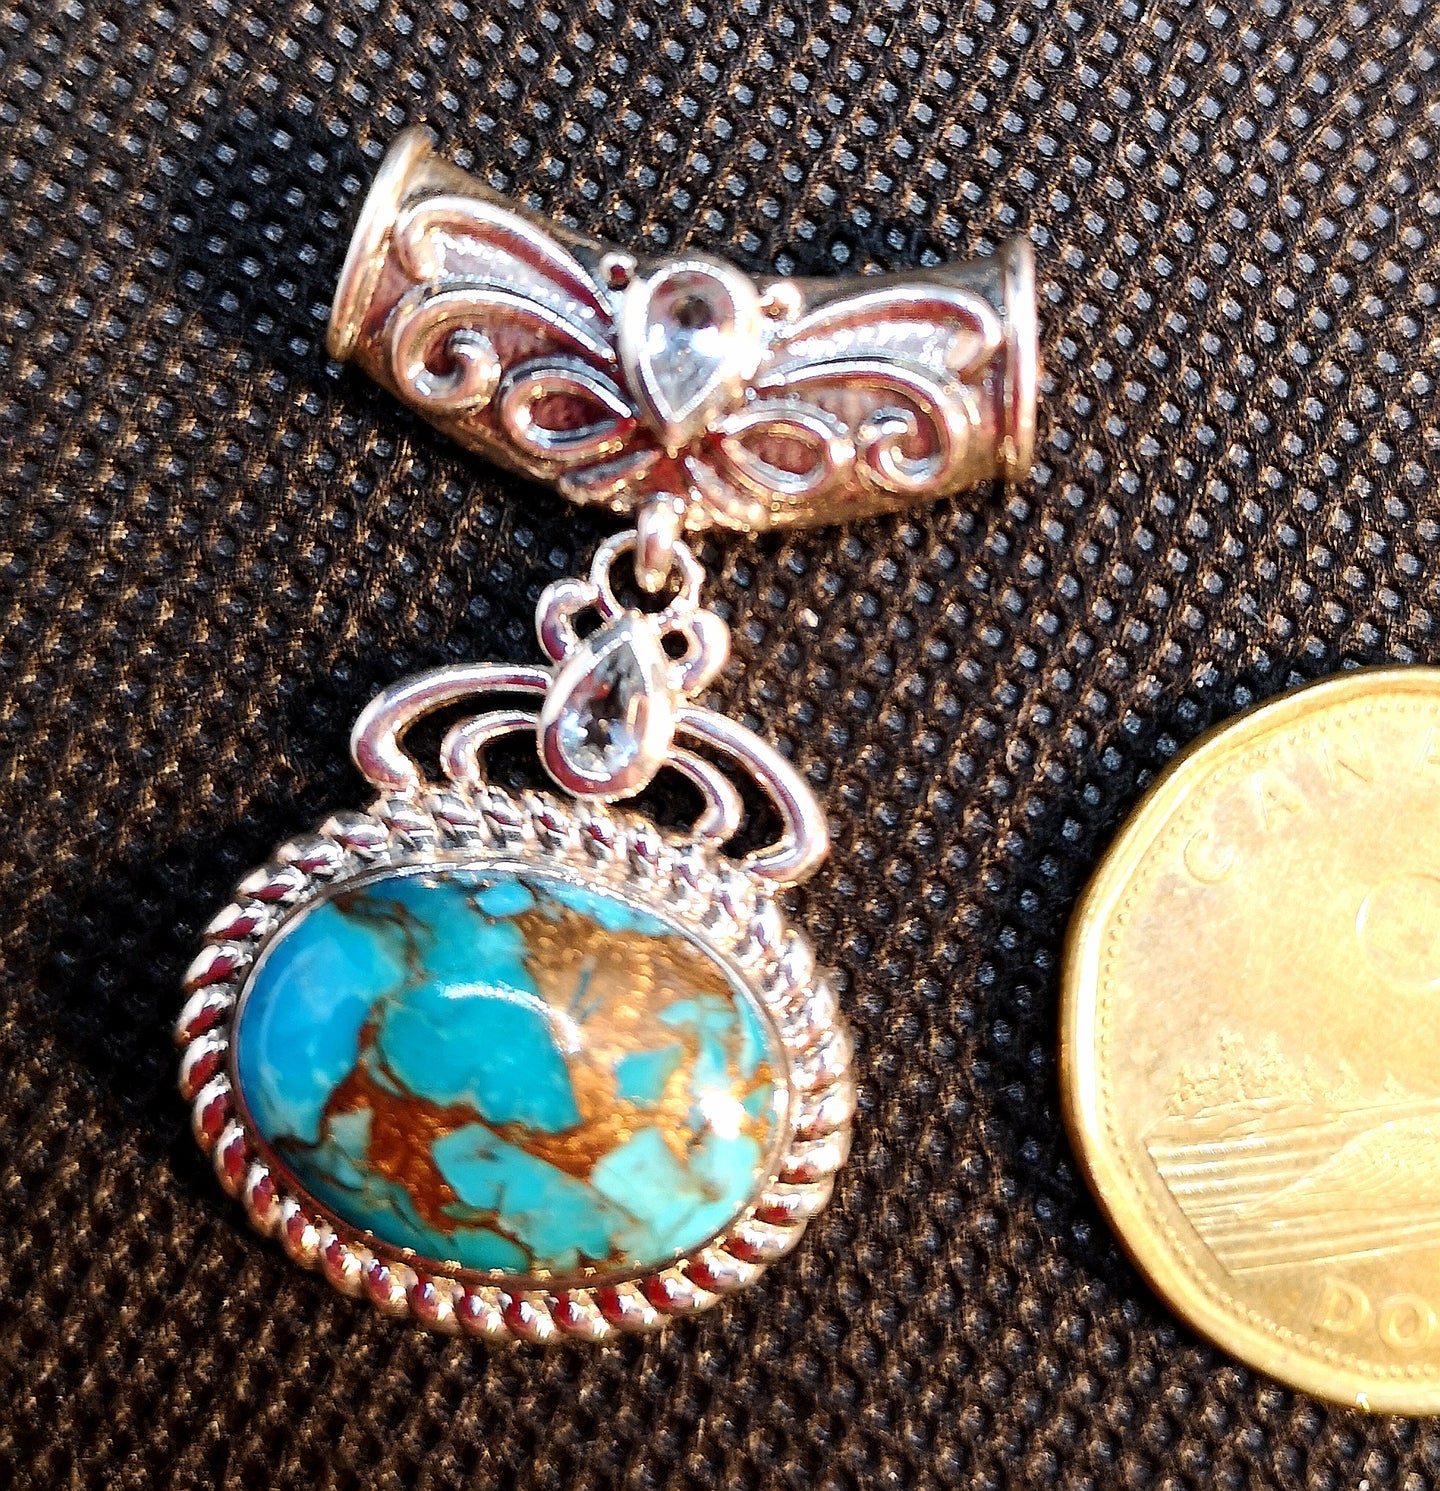 Genuine turquoise with copper inclusions, pendant in sterling silver with blue topaz